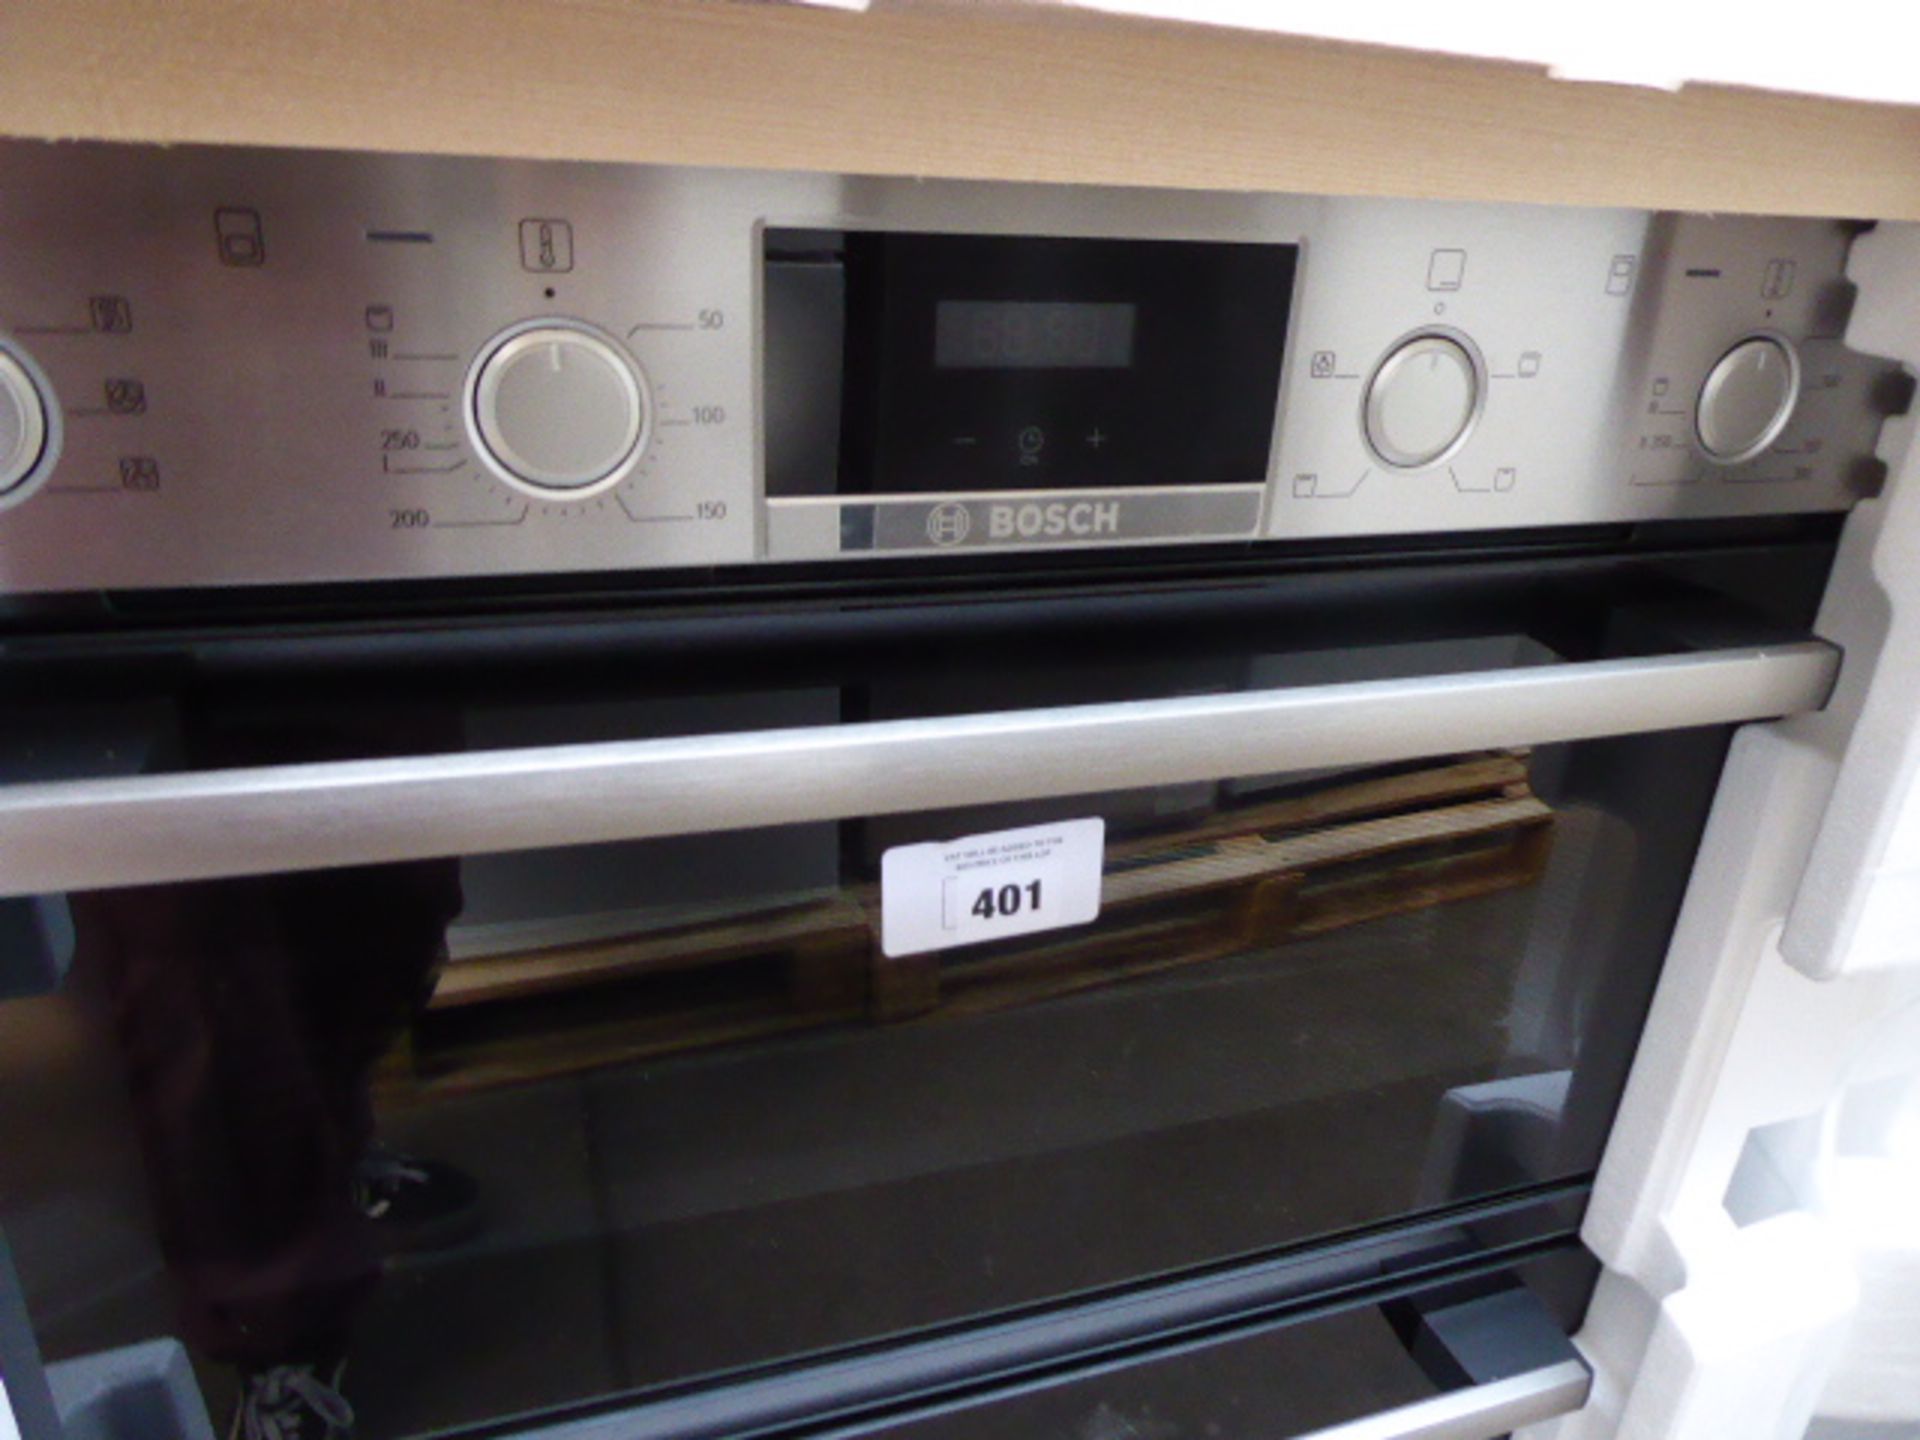 MBS533BS0BB Bosch Double oven - Image 2 of 3